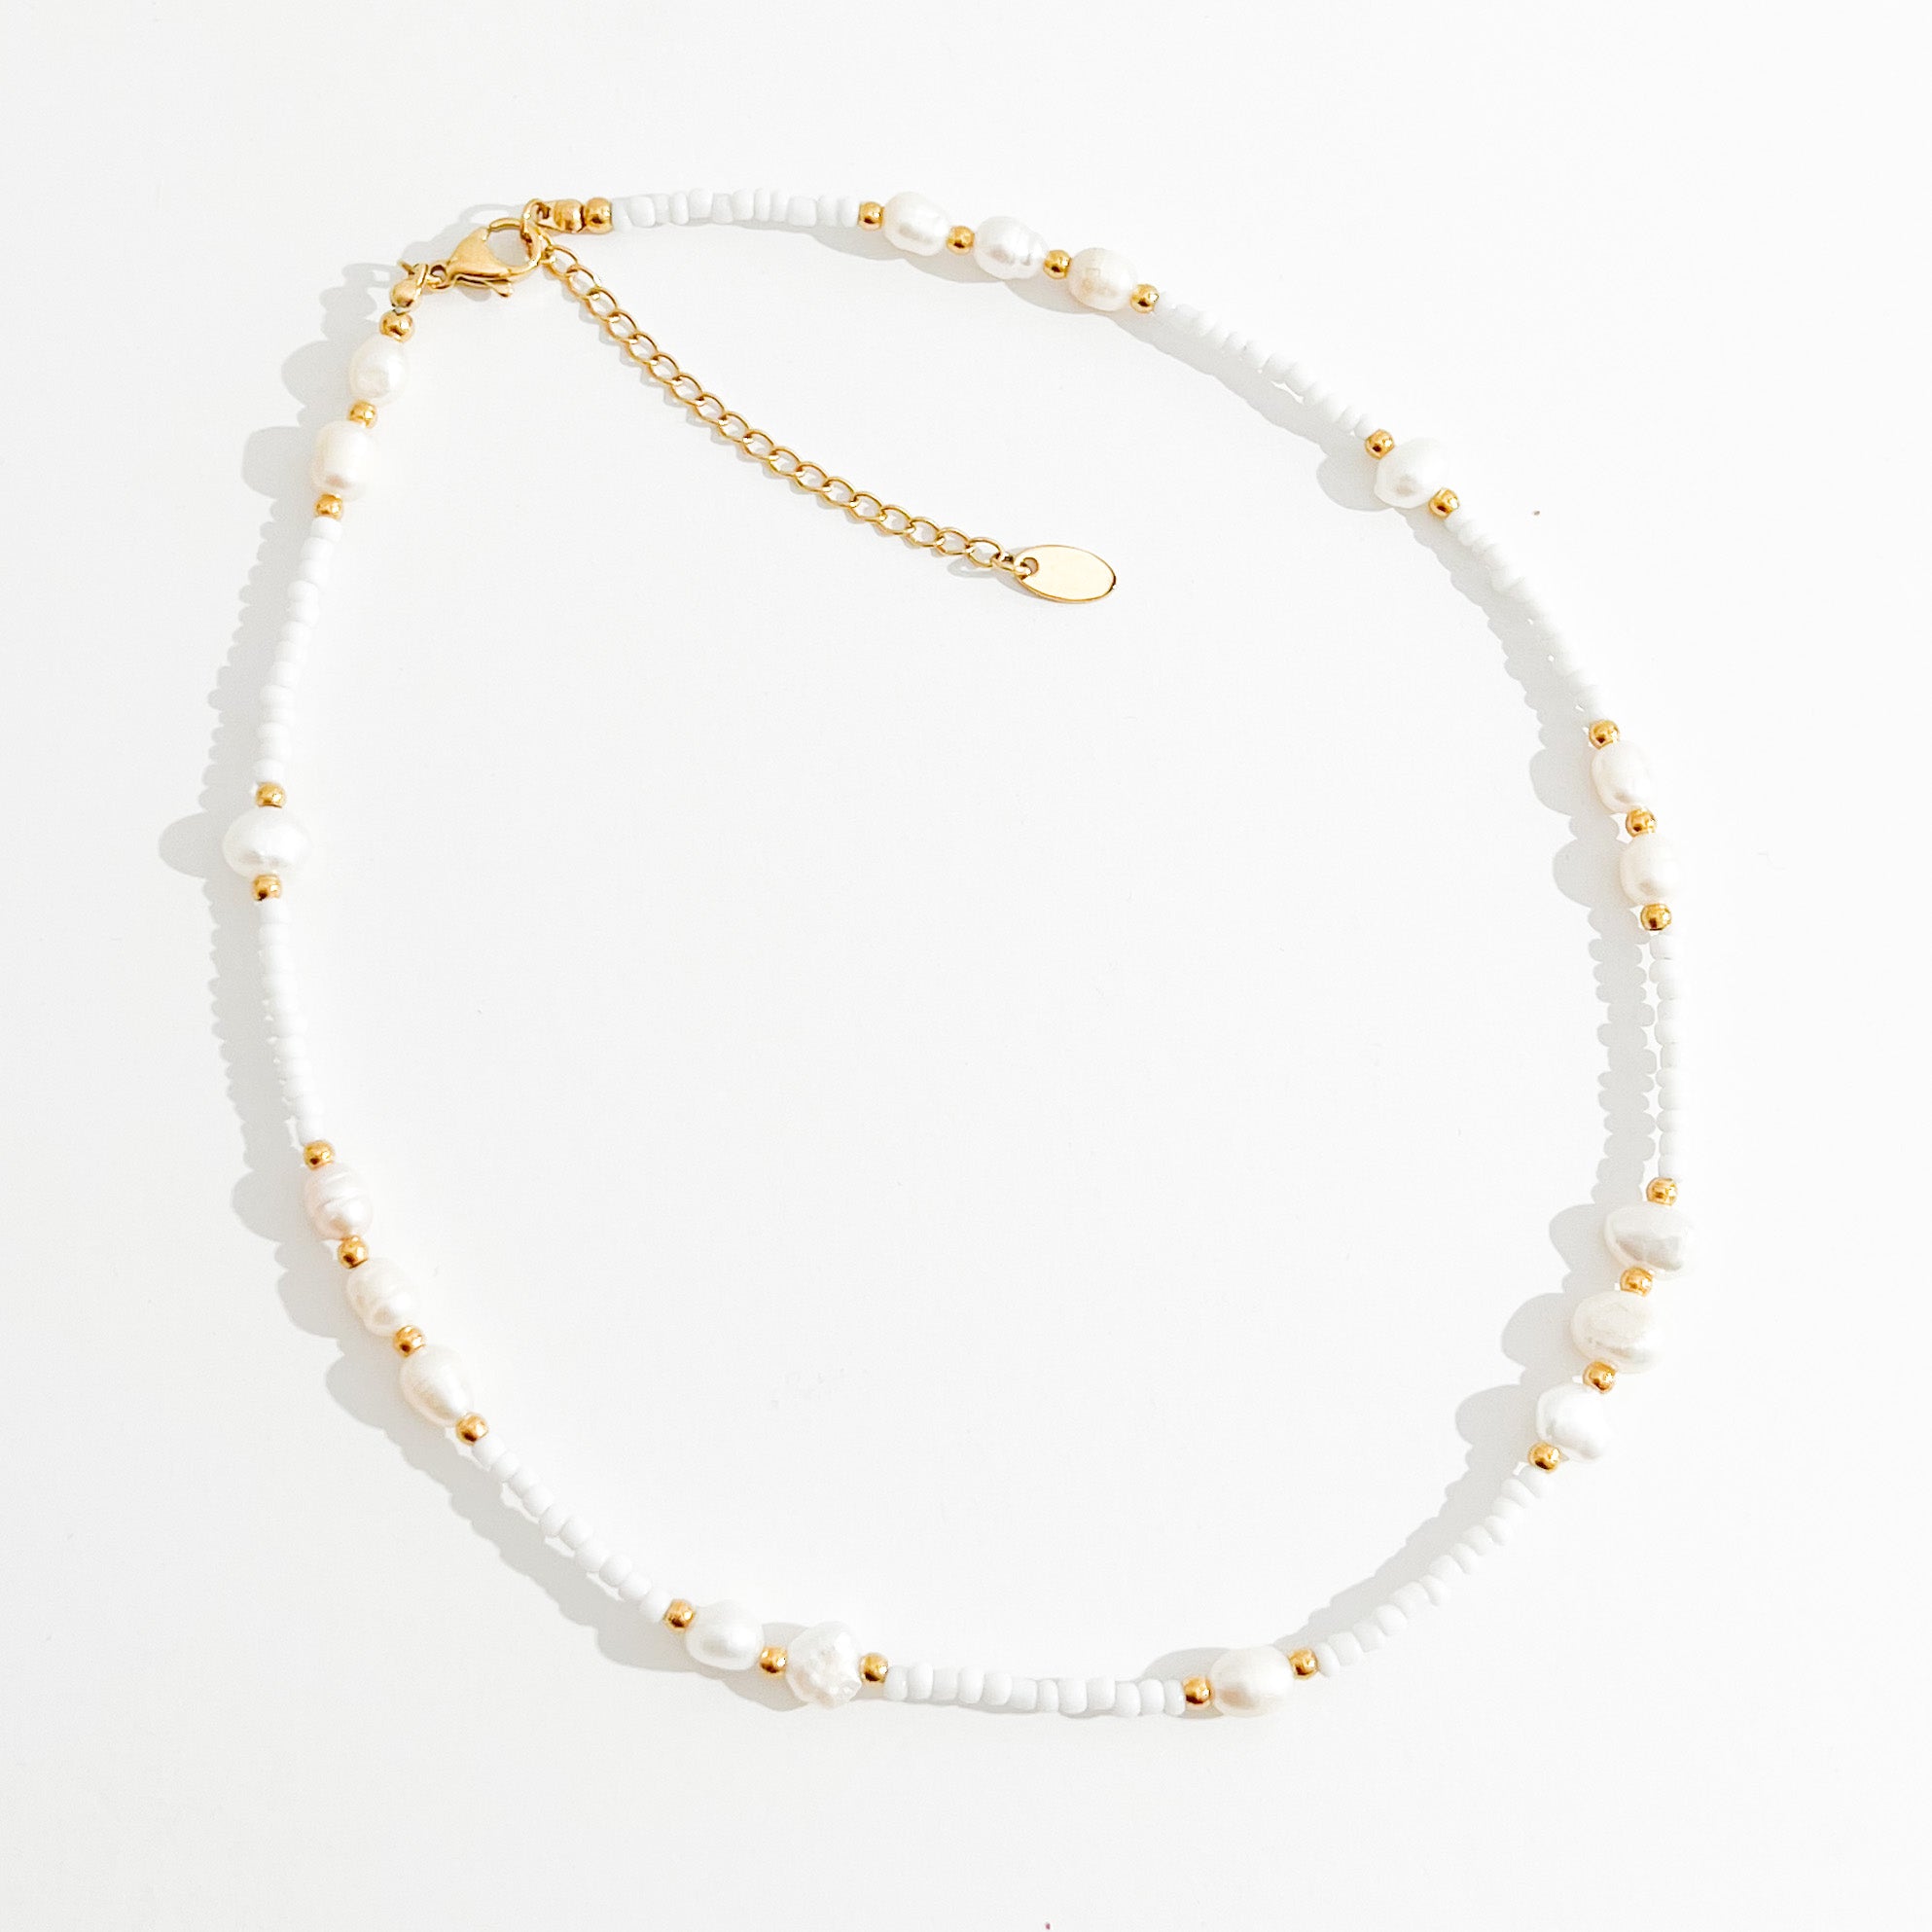 White Beads + Pearls Necklace - Flaire & Co.